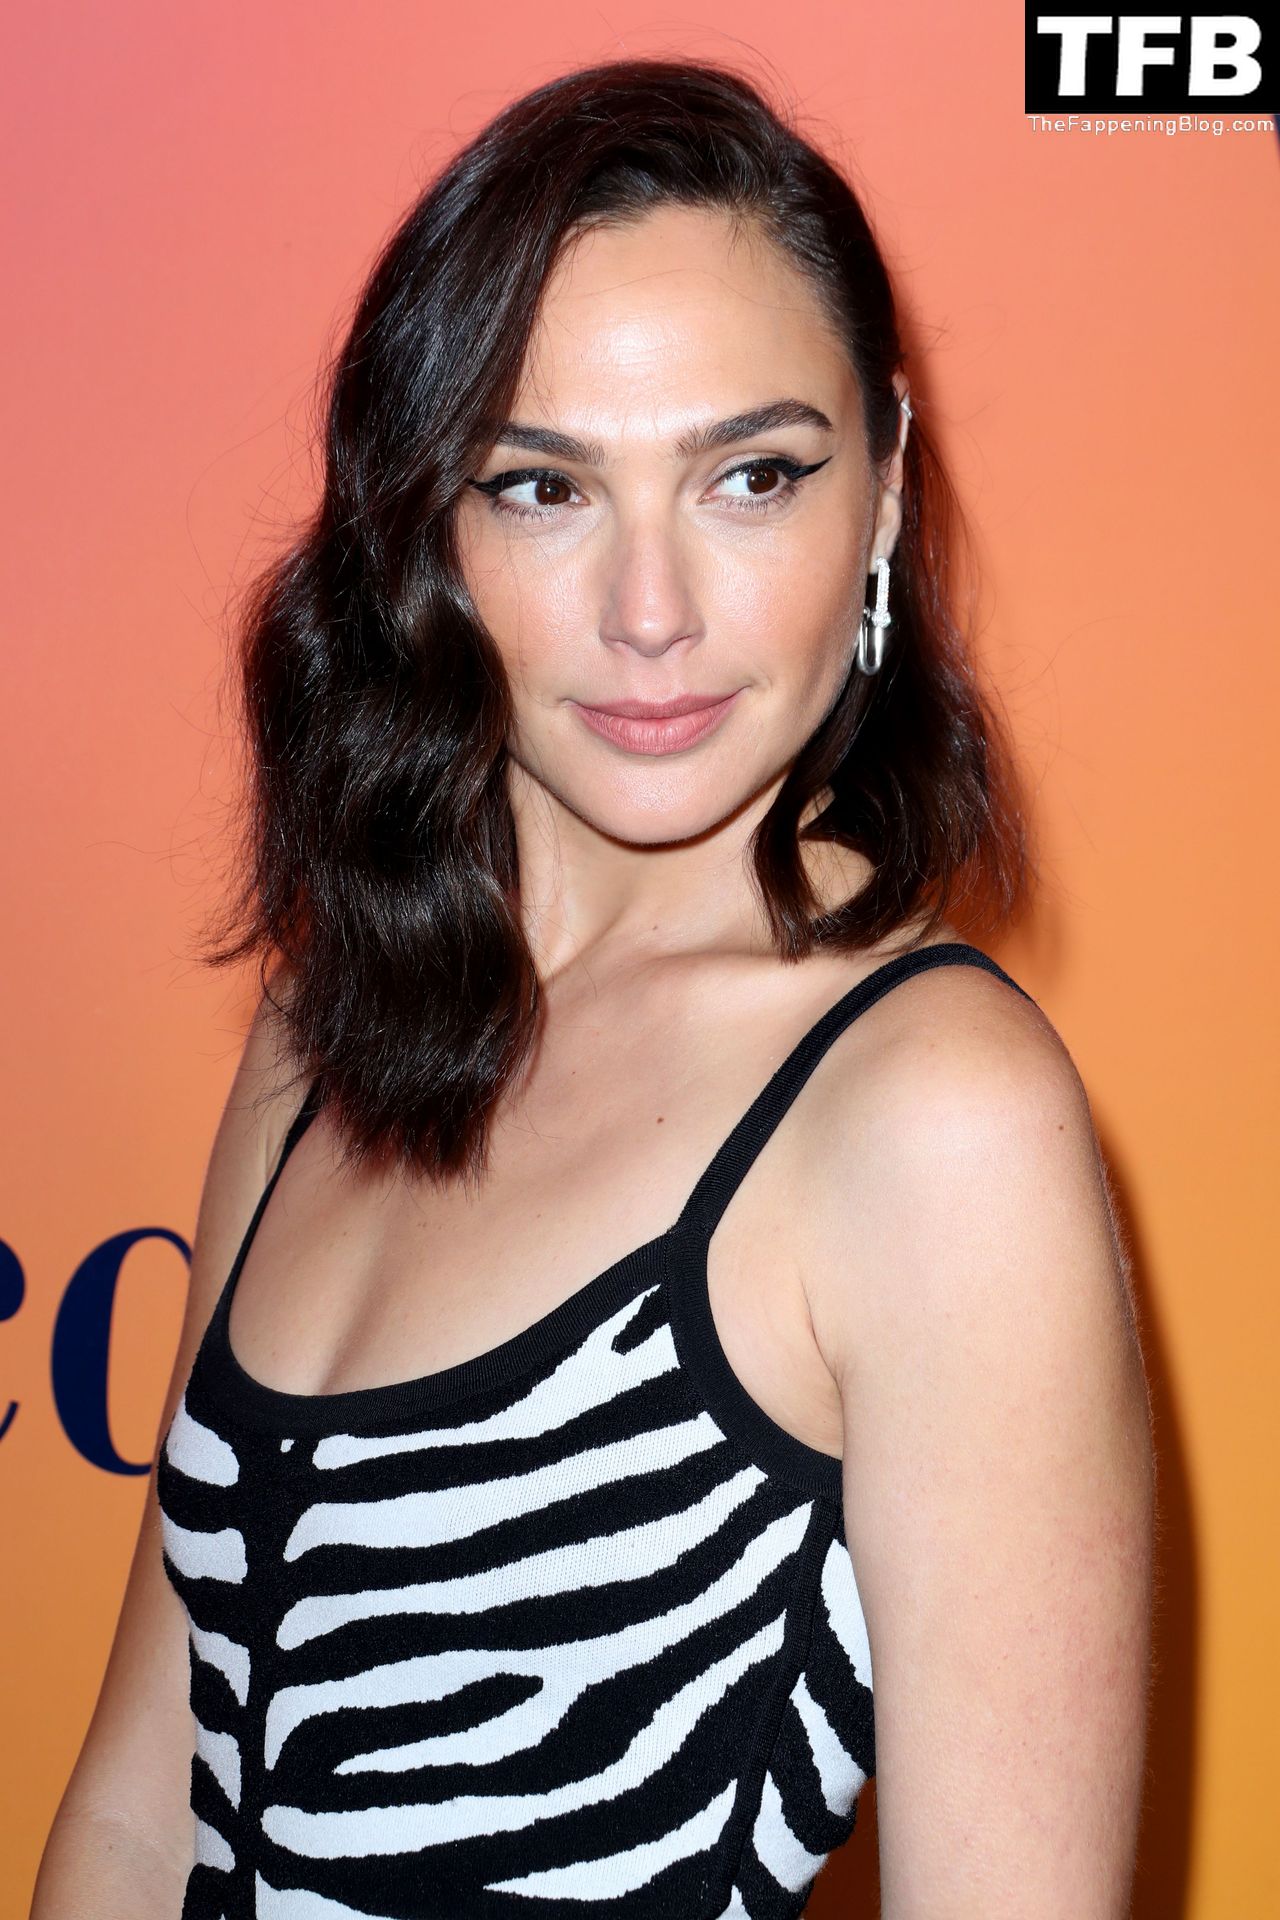 Gal Gadot Sexy 19 thefappeningblog.com  - Gal Gadot Displays Her Gorgeous Figure at the Traveling Exhibition “Solaire Culture” in Beverly Hills (77 Photos)